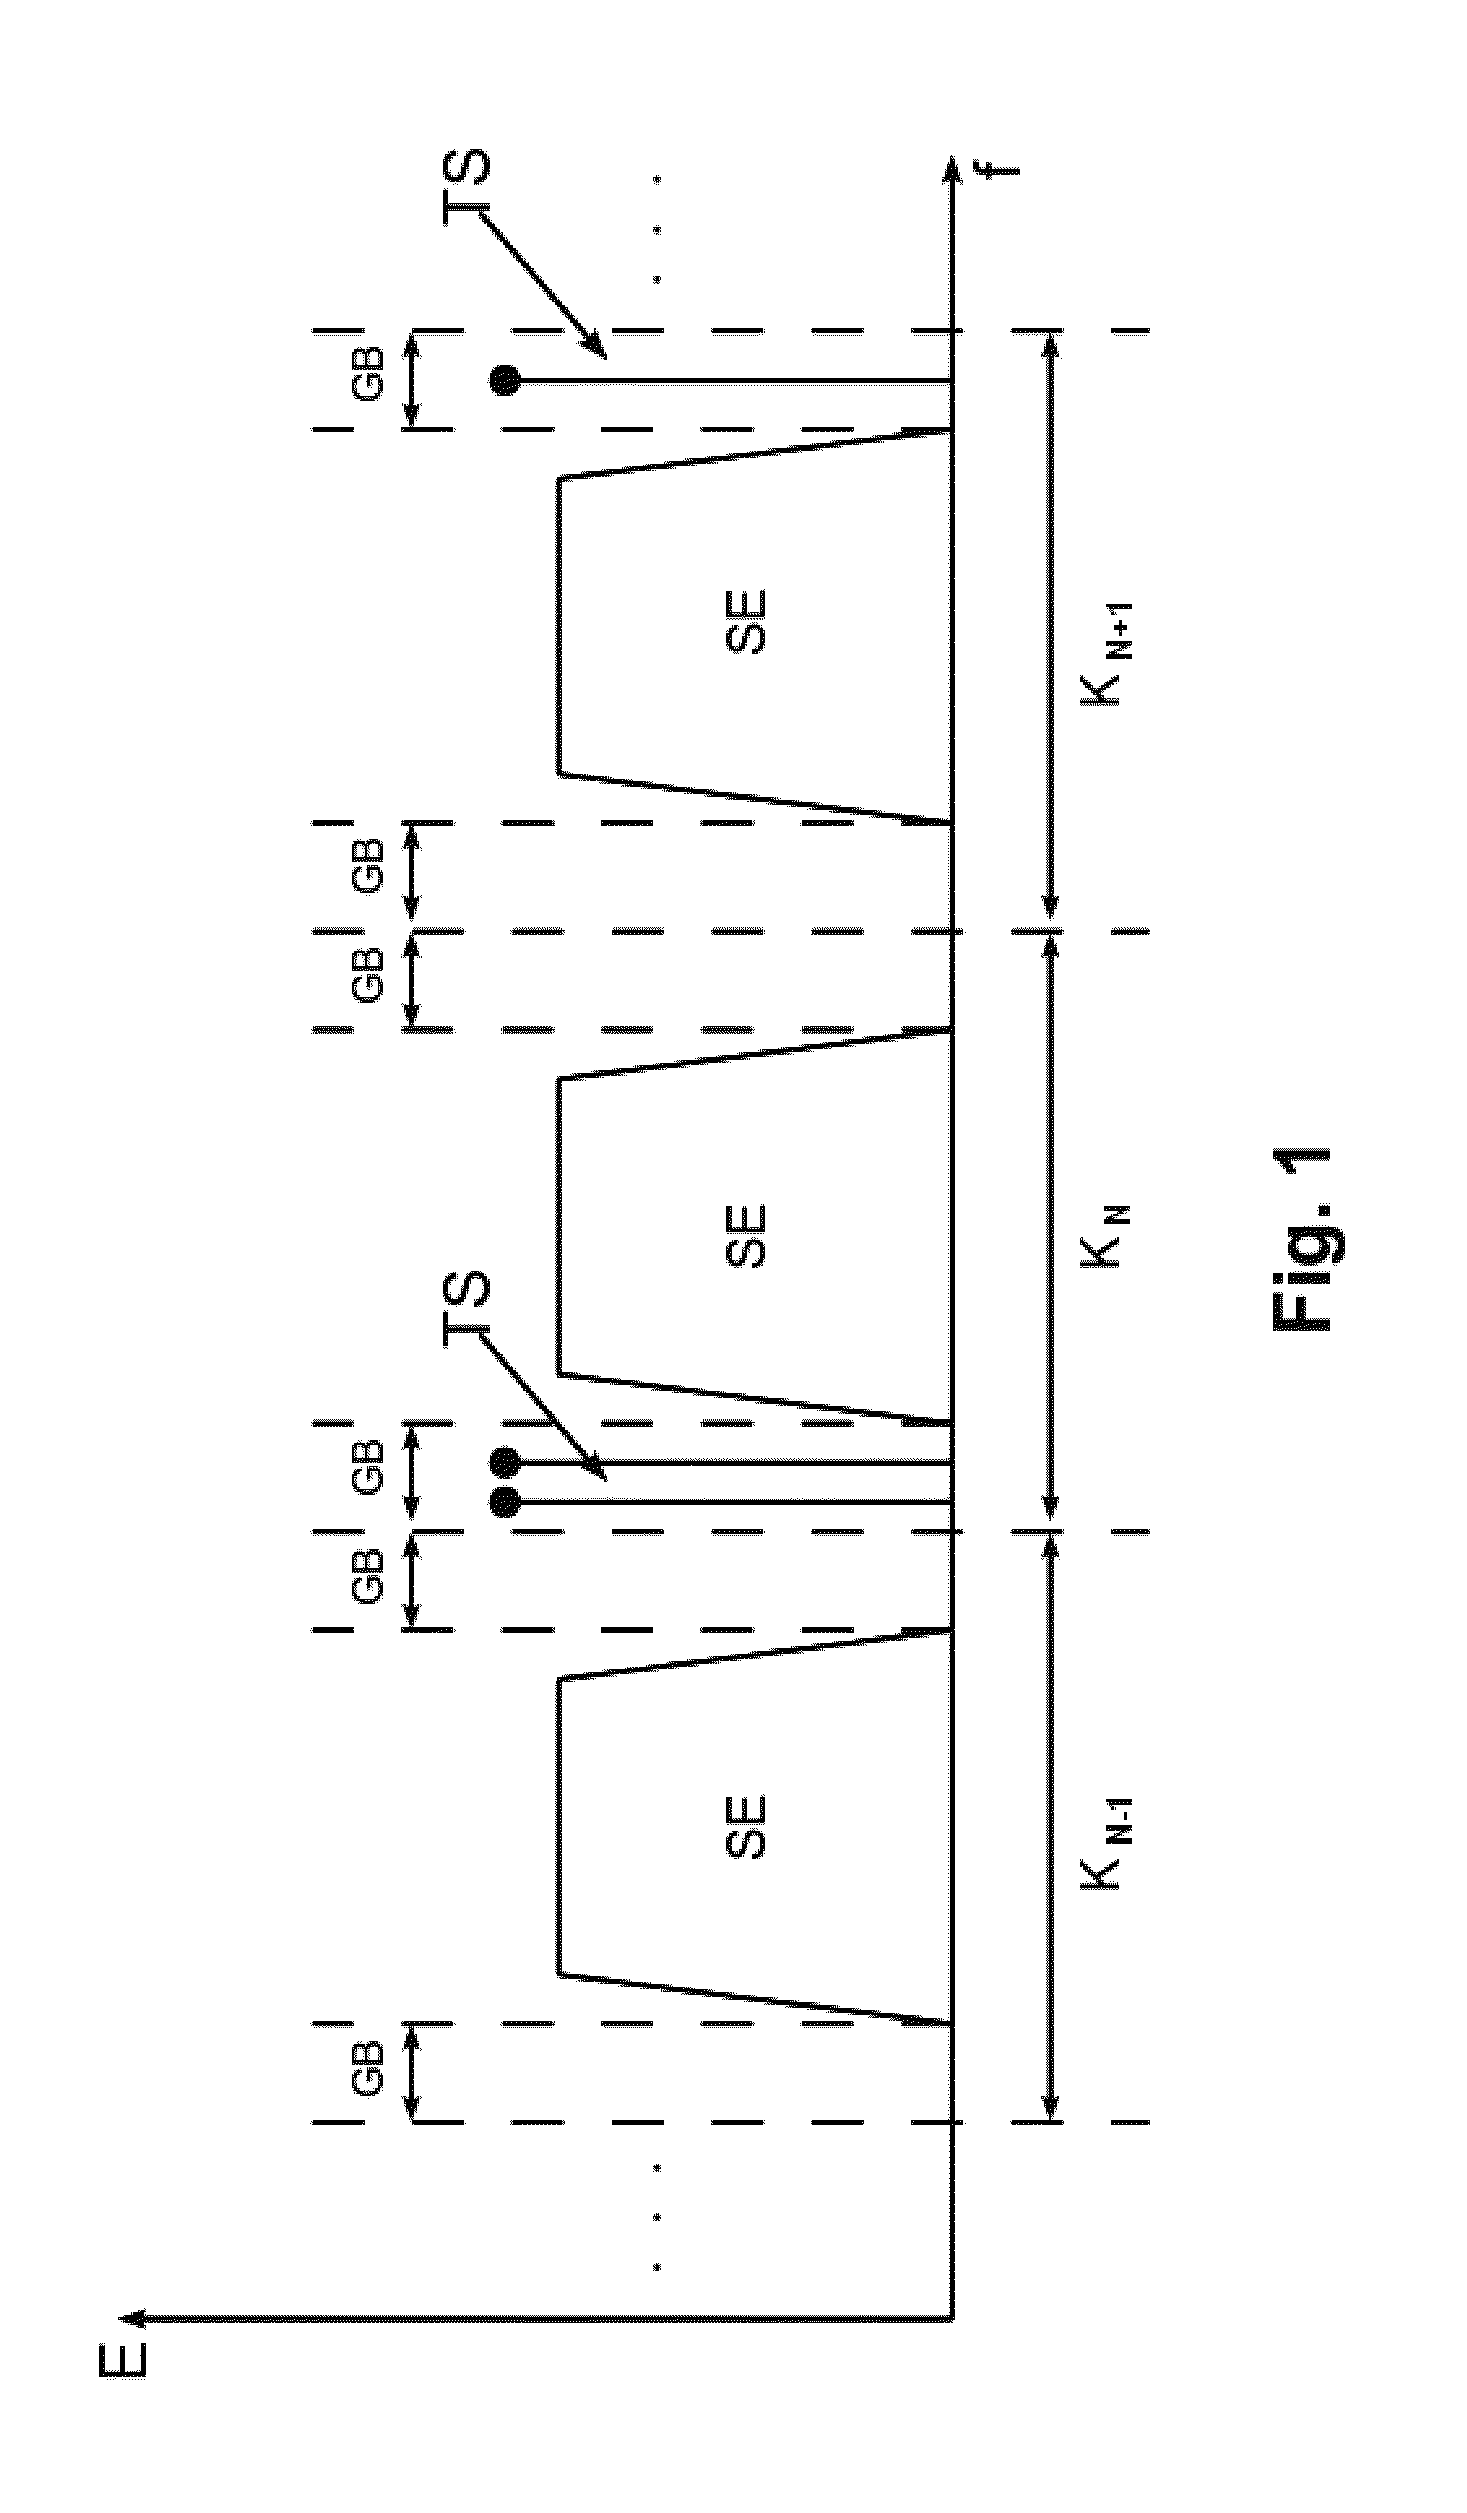 Method of tagging signals used for leakage detection and measurement in cable television networks and apparatus for detection and/or measurement of leakage sources tagged with this method